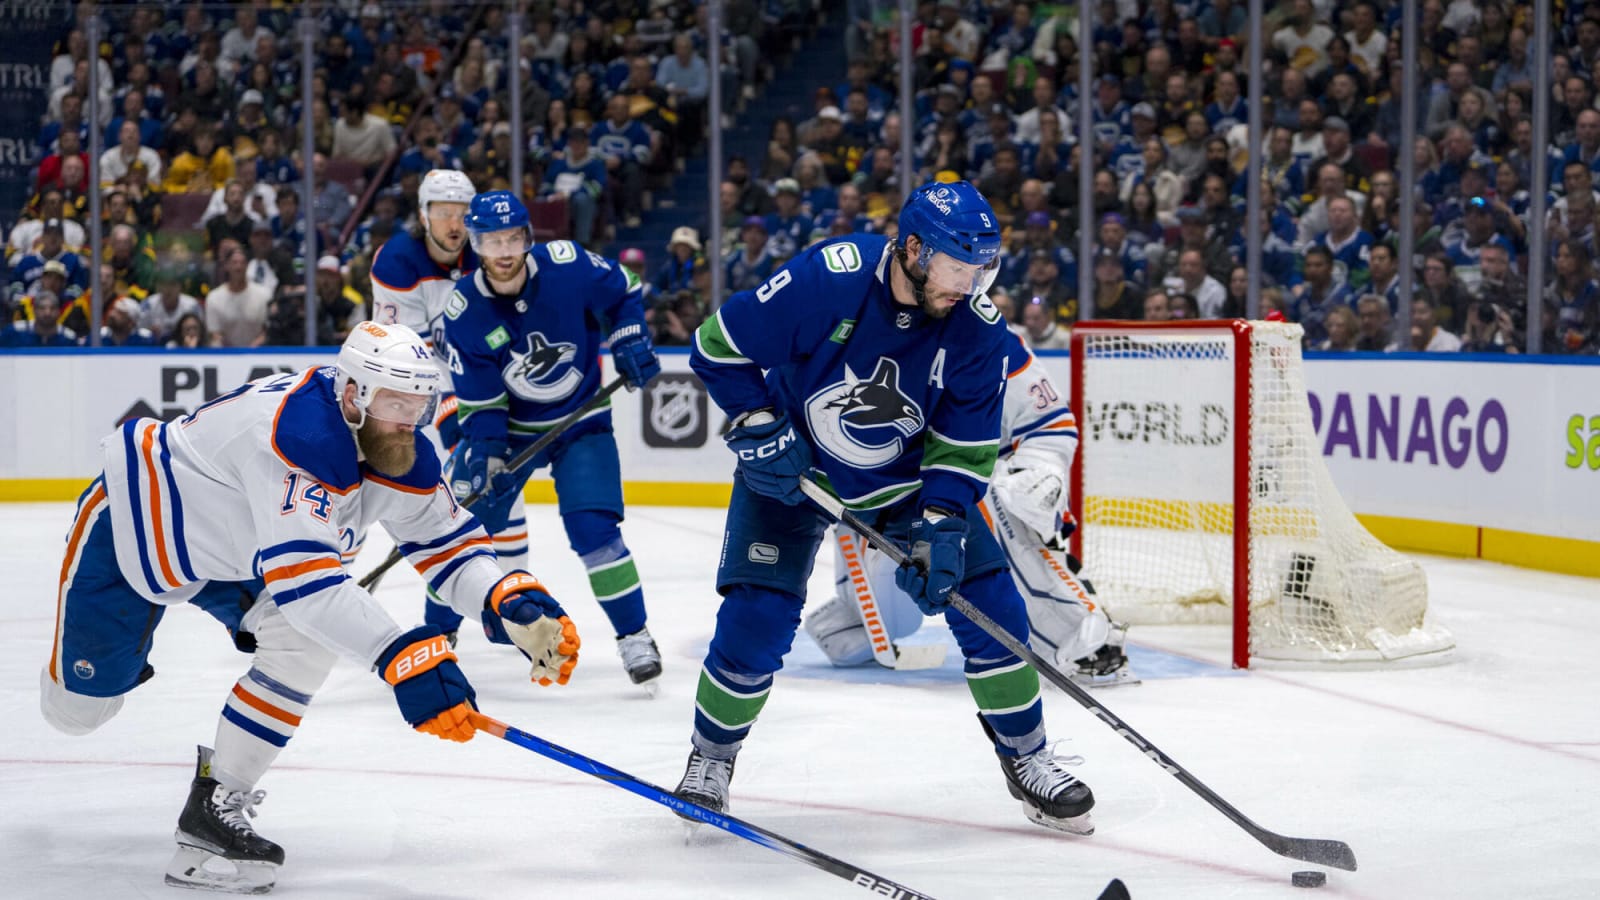 Edmonton Oilers vs. Vancouver Canucks Game 5: A Tactical Review